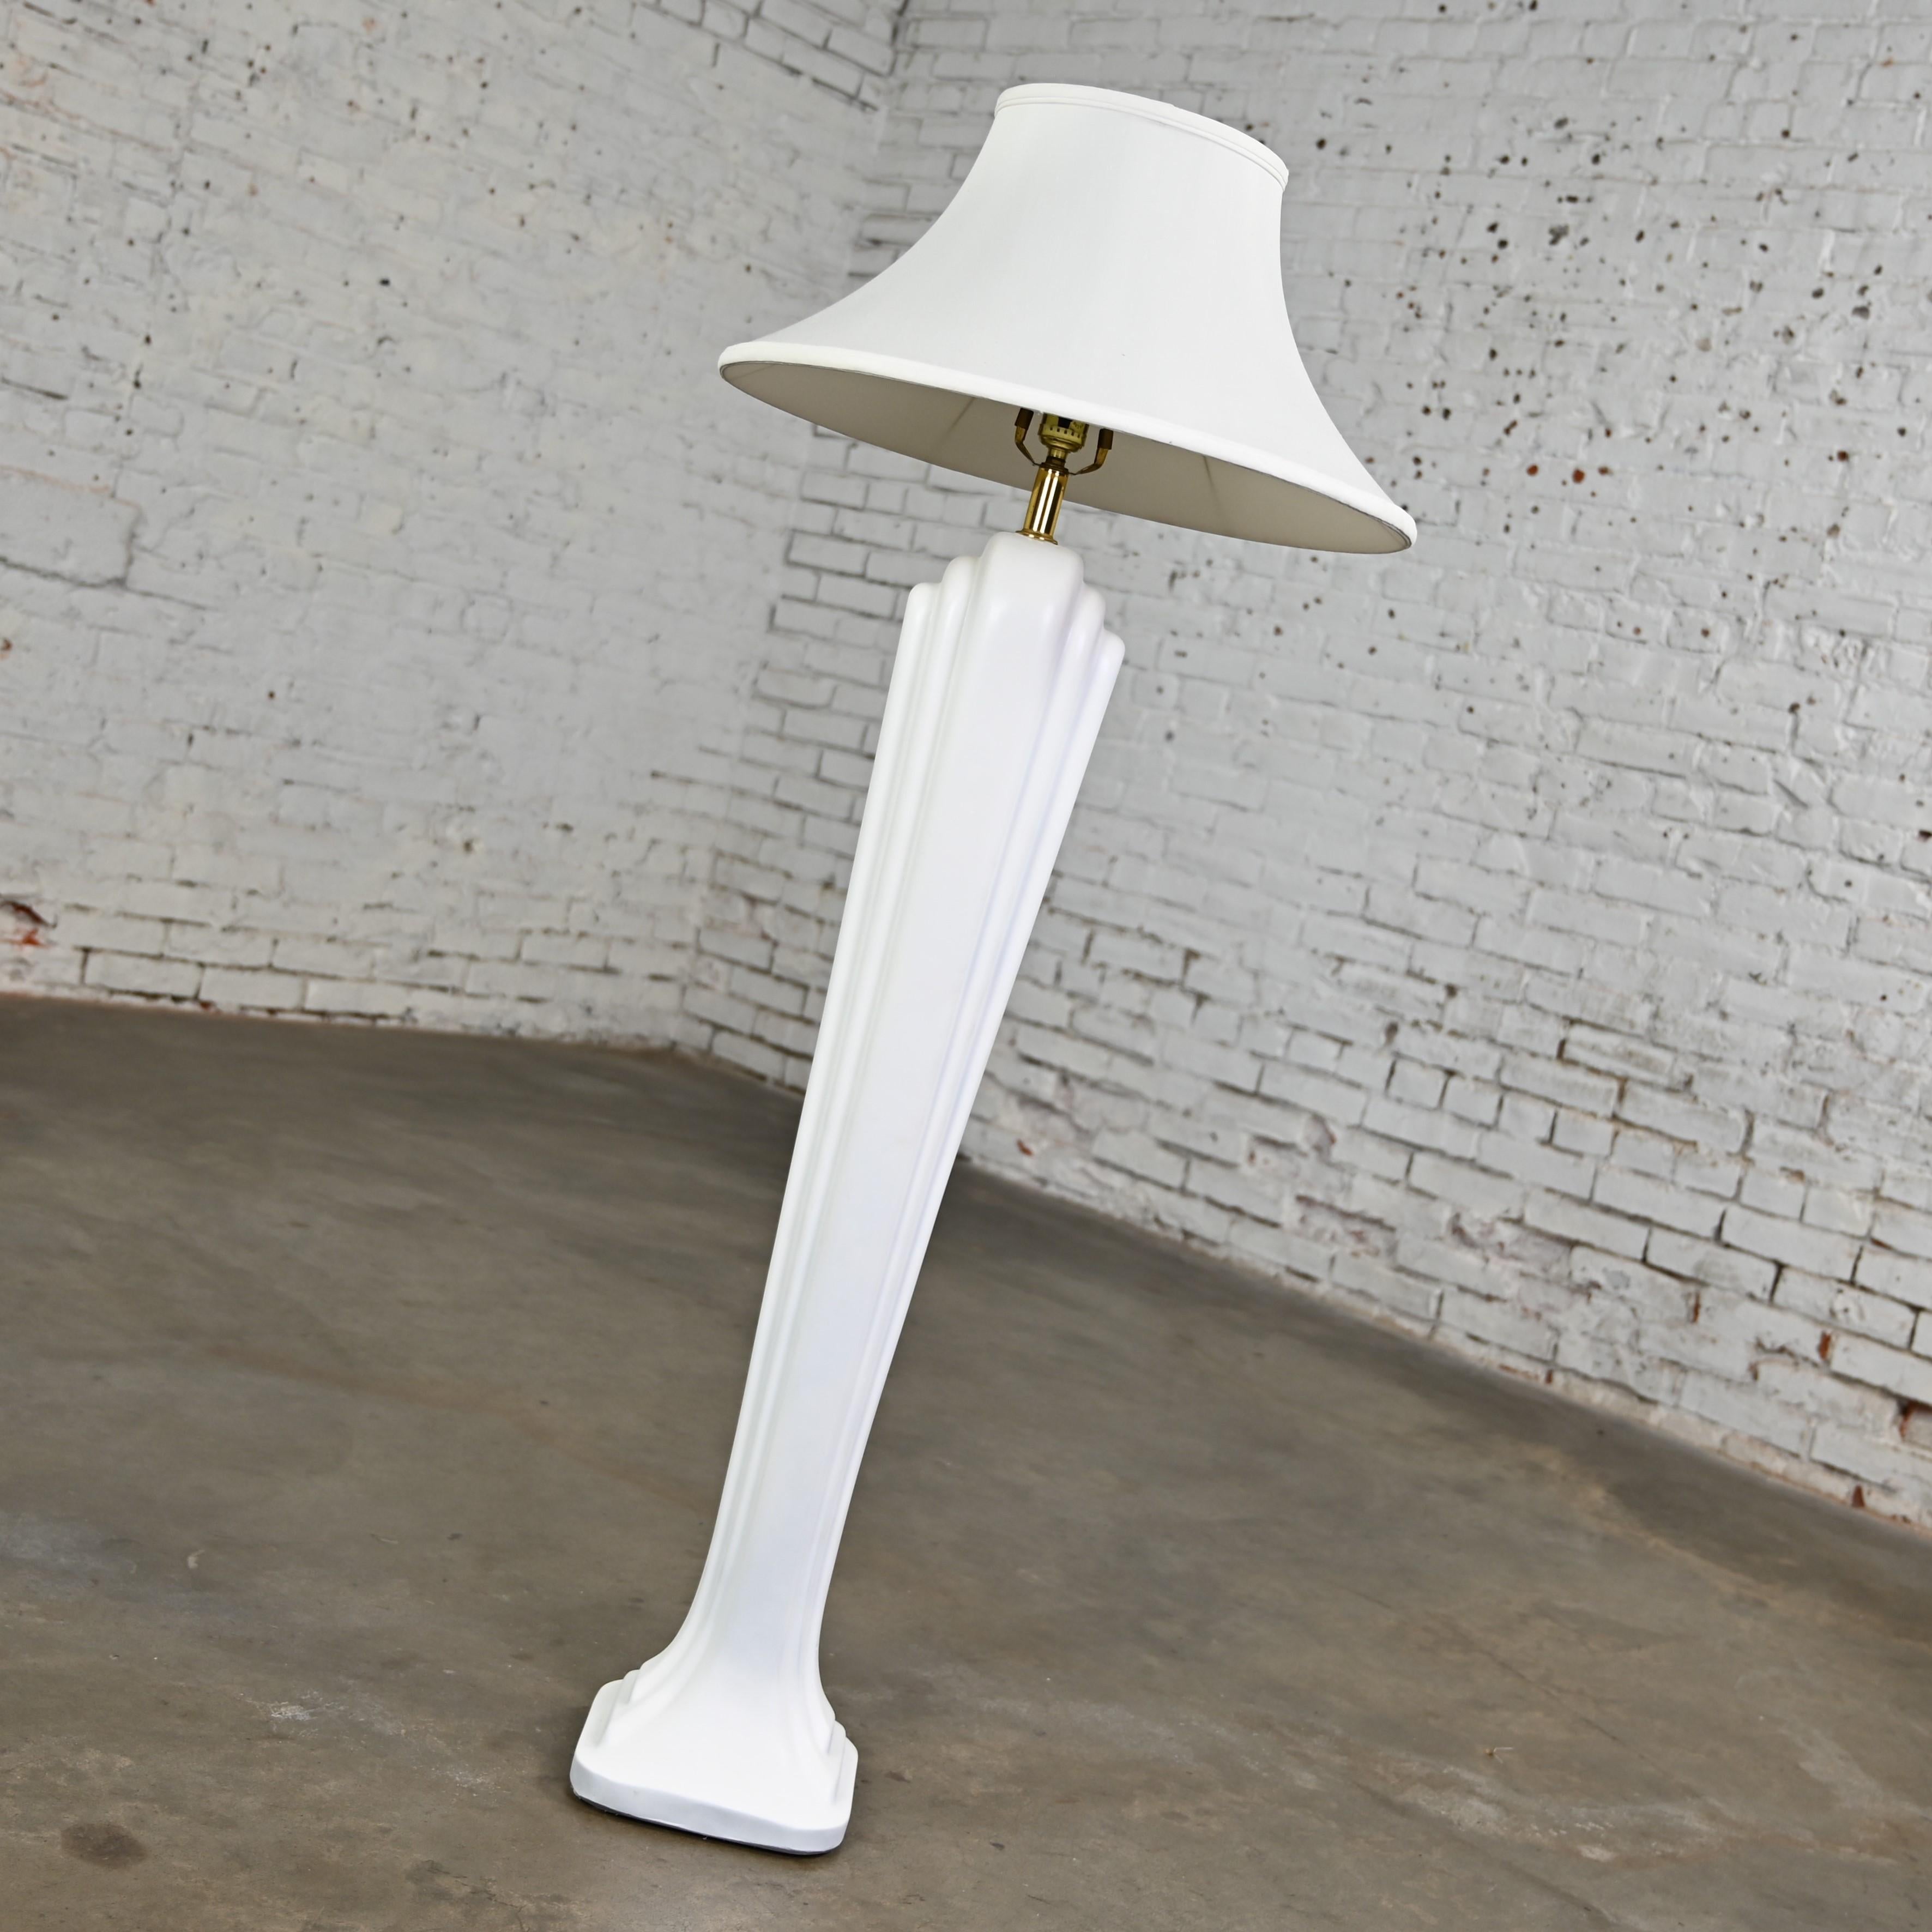 Gorgeous vintage Art Deco Revival to Postmodern Paolo Gucci floor lamp comprised of white sculpted resin and the original white silk-like bell shade. Beautiful condition, keeping in mind that this is vintage and not new so will have signs of use and